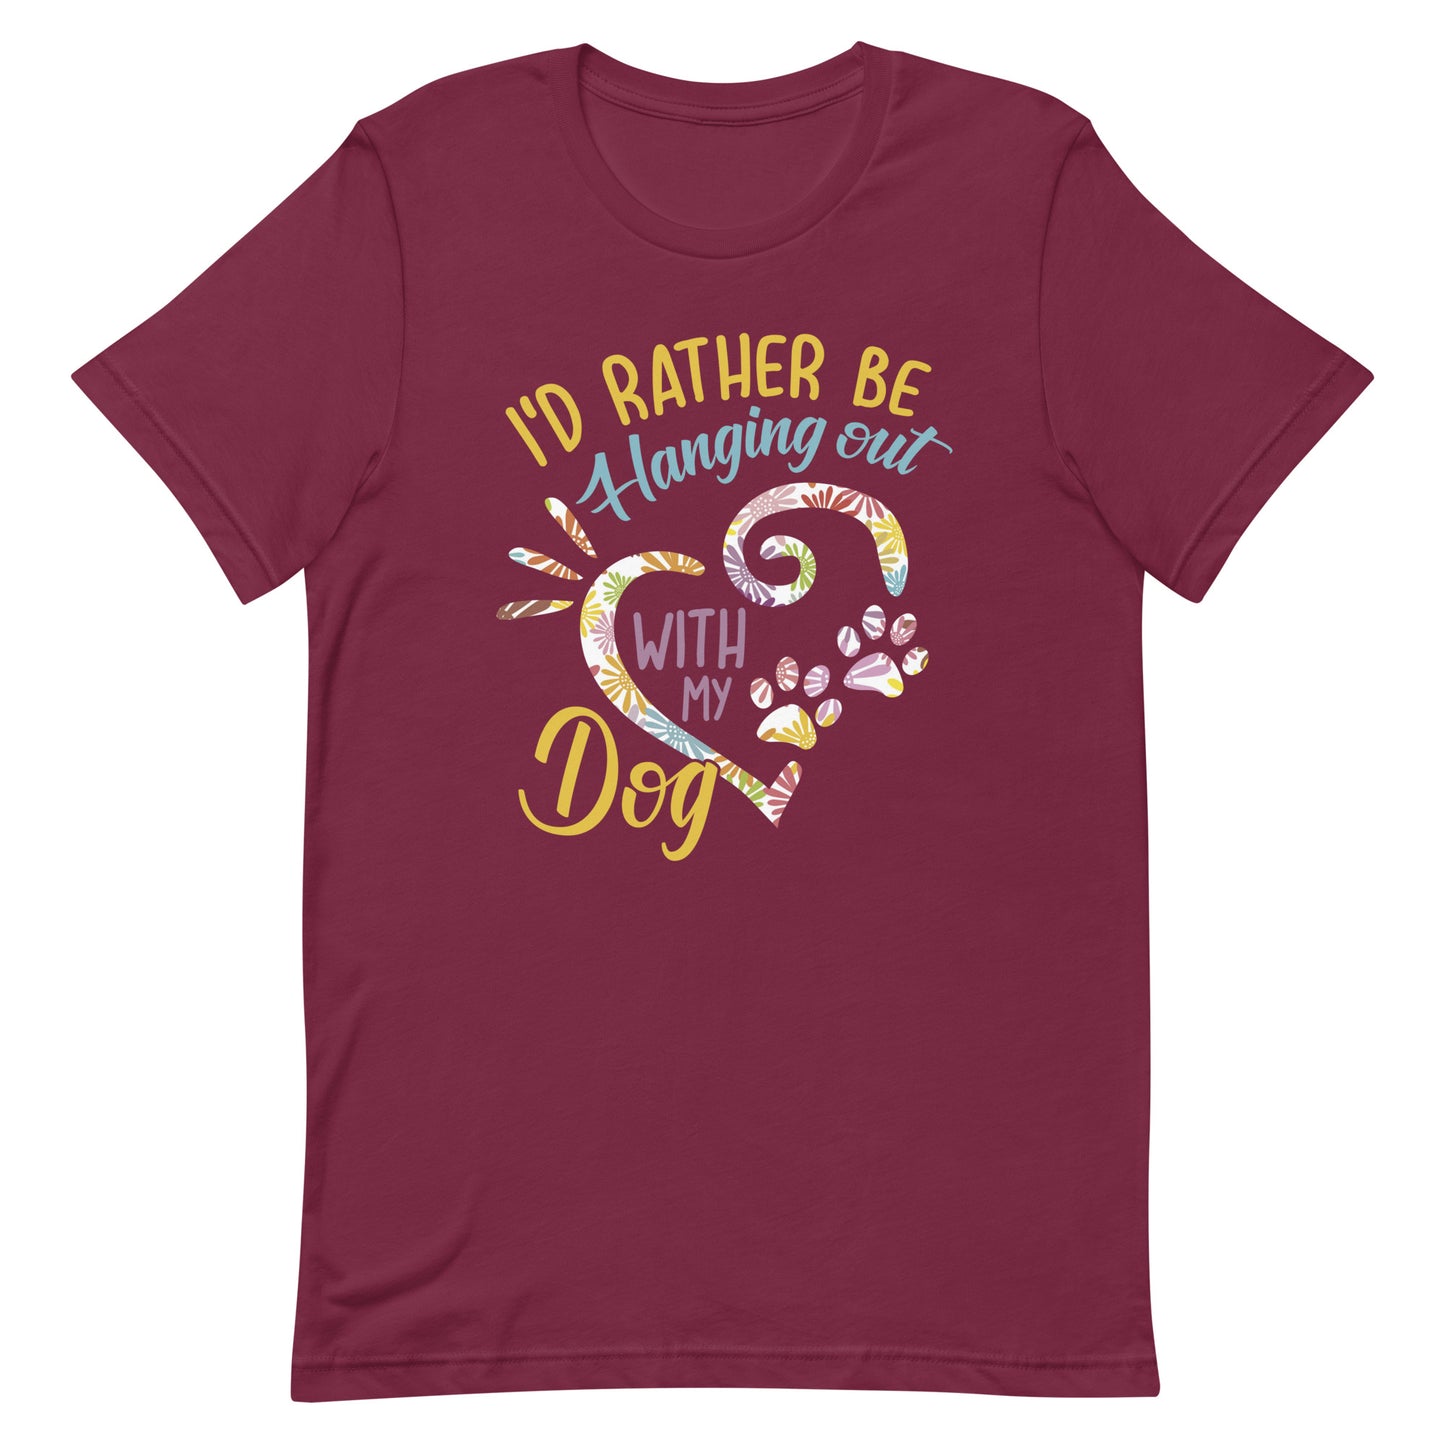 I'd Rather Be Hanging Out with My Dog T-Shirt